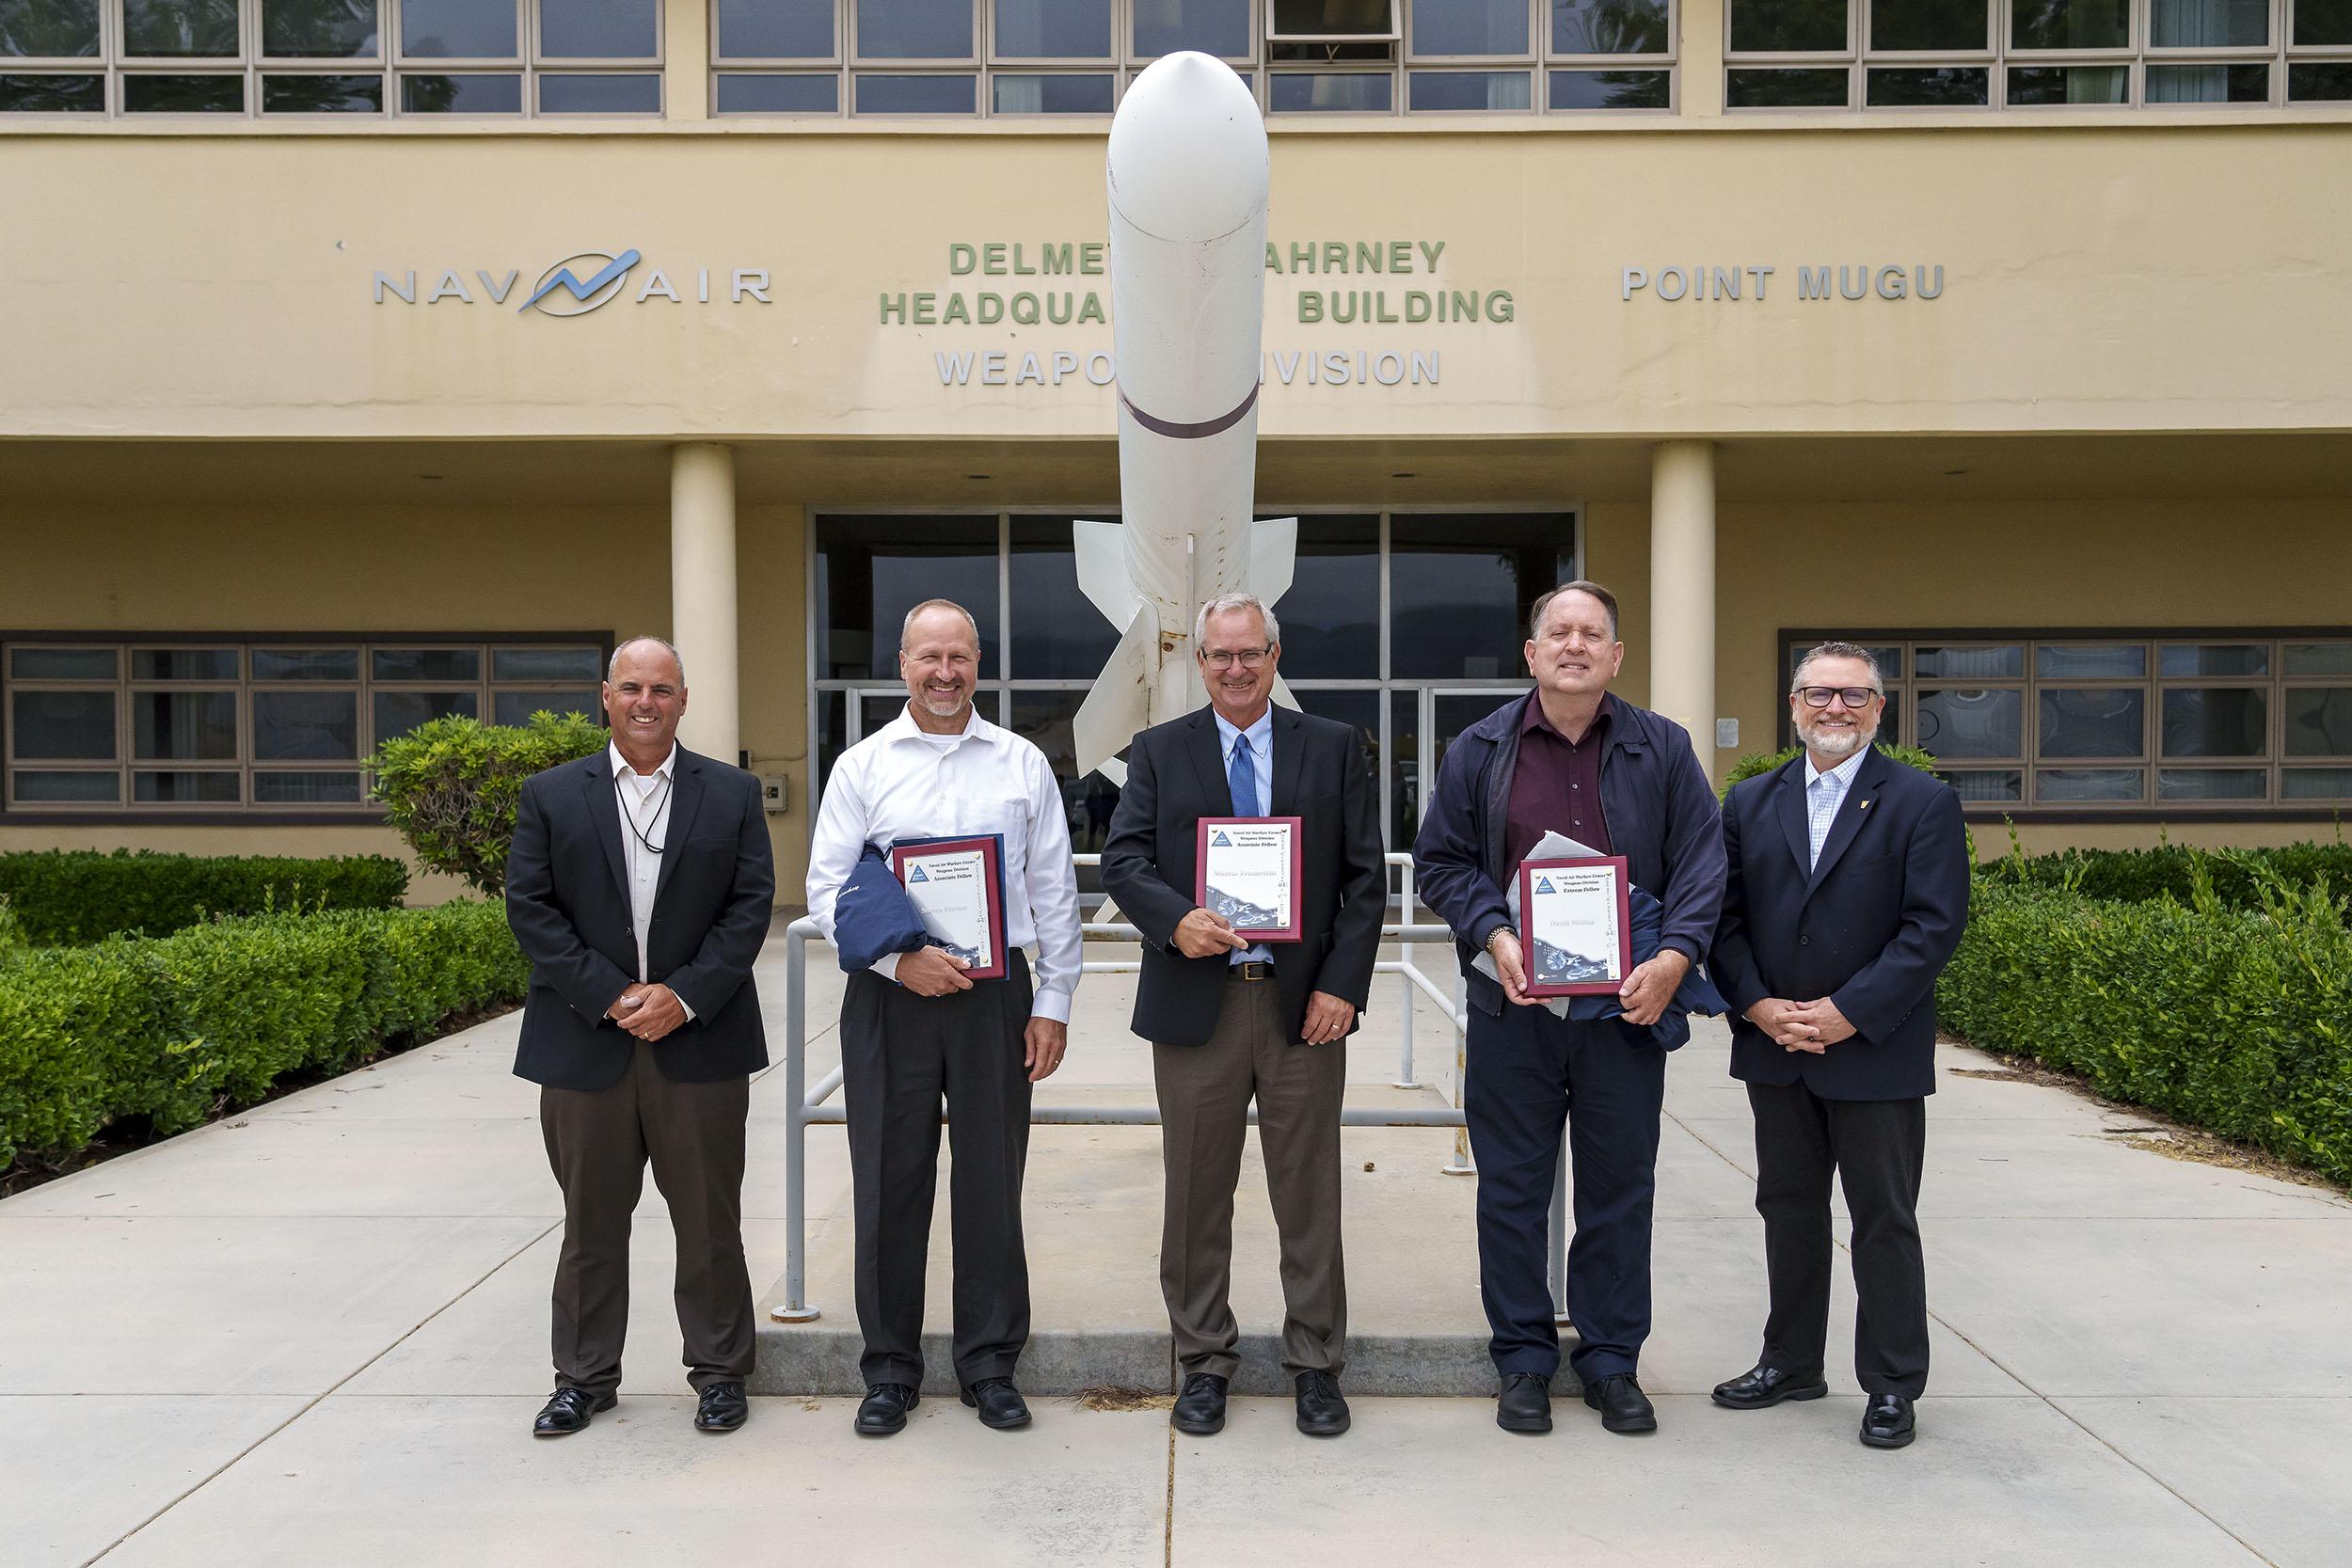 NAWCWD Fellow inductees from Point Mugu pose for a picture with Dan Carreño, NAWCWD executive director, left, and Tom Dowd, NAWCWD’s Ranges, Target Operations, Instrumentation and Labs Group director, right, after the Fellows induction ceremony on July 13. (U.S. Navy photo by Rob Grabendike)